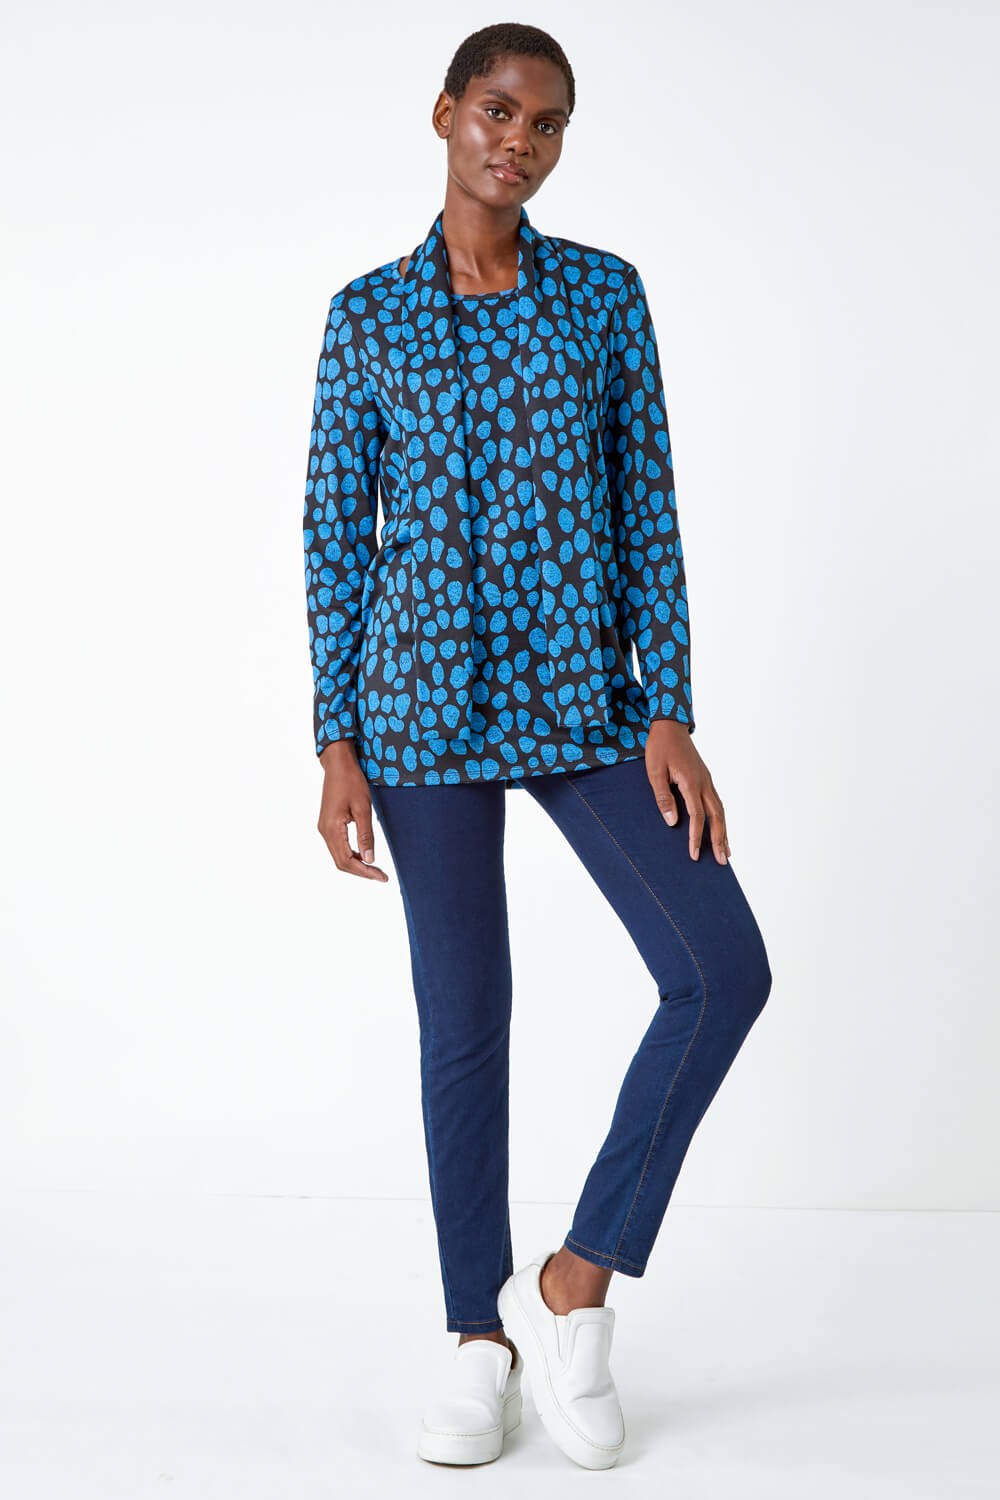 Blue Spot Print Tunic Top and Scarf, Image 2 of 5